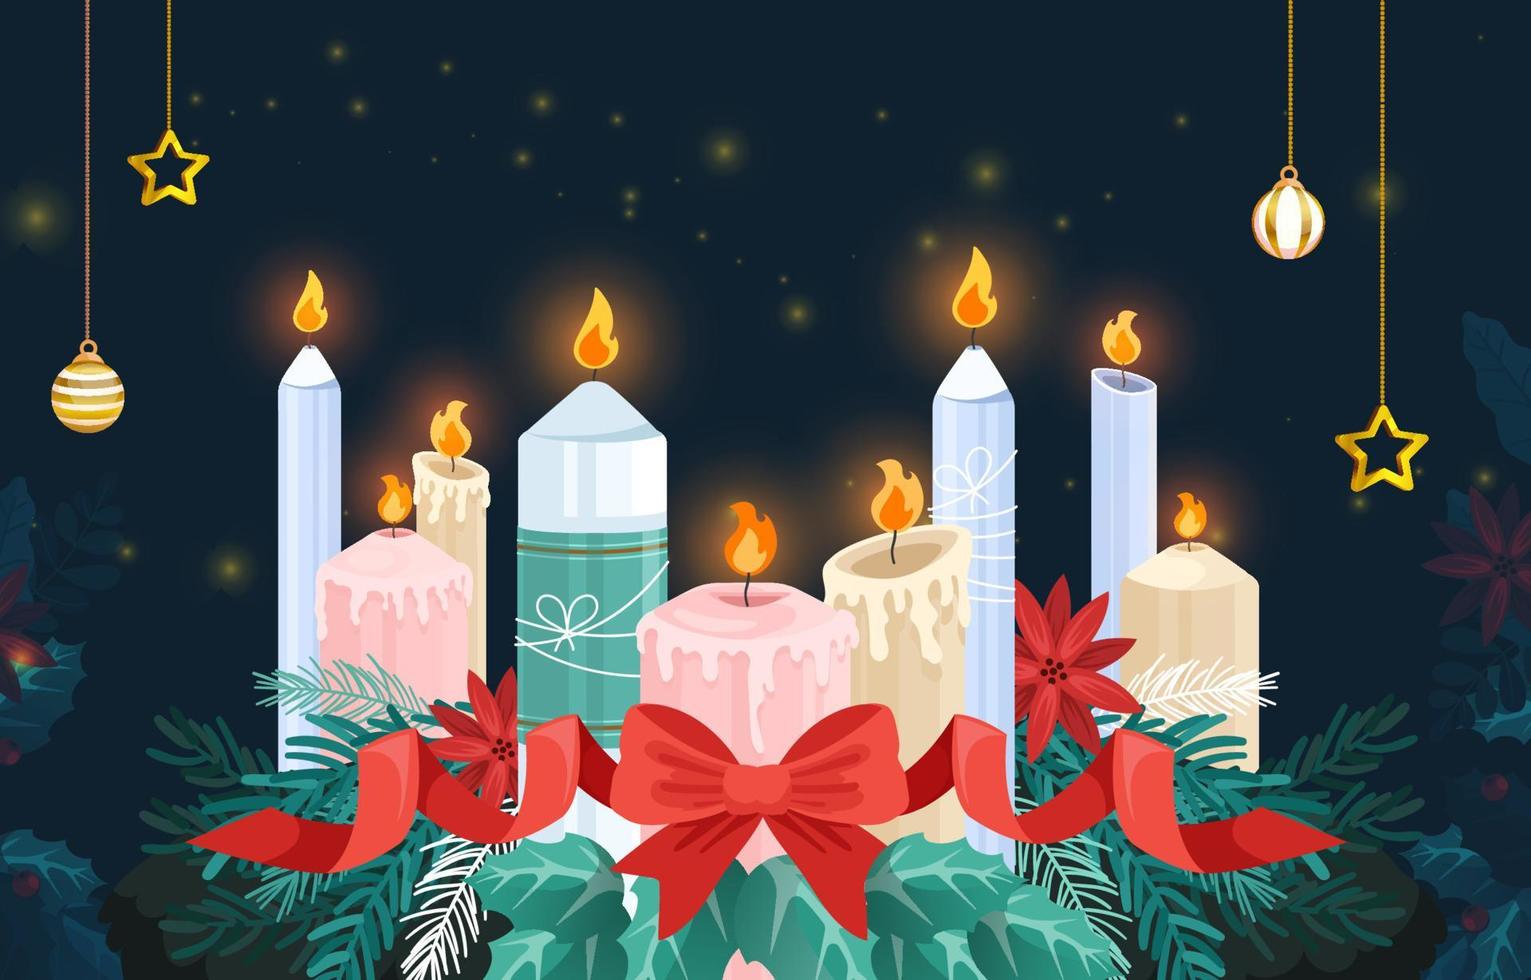 Advent Celebration with Candle and Ornament vector